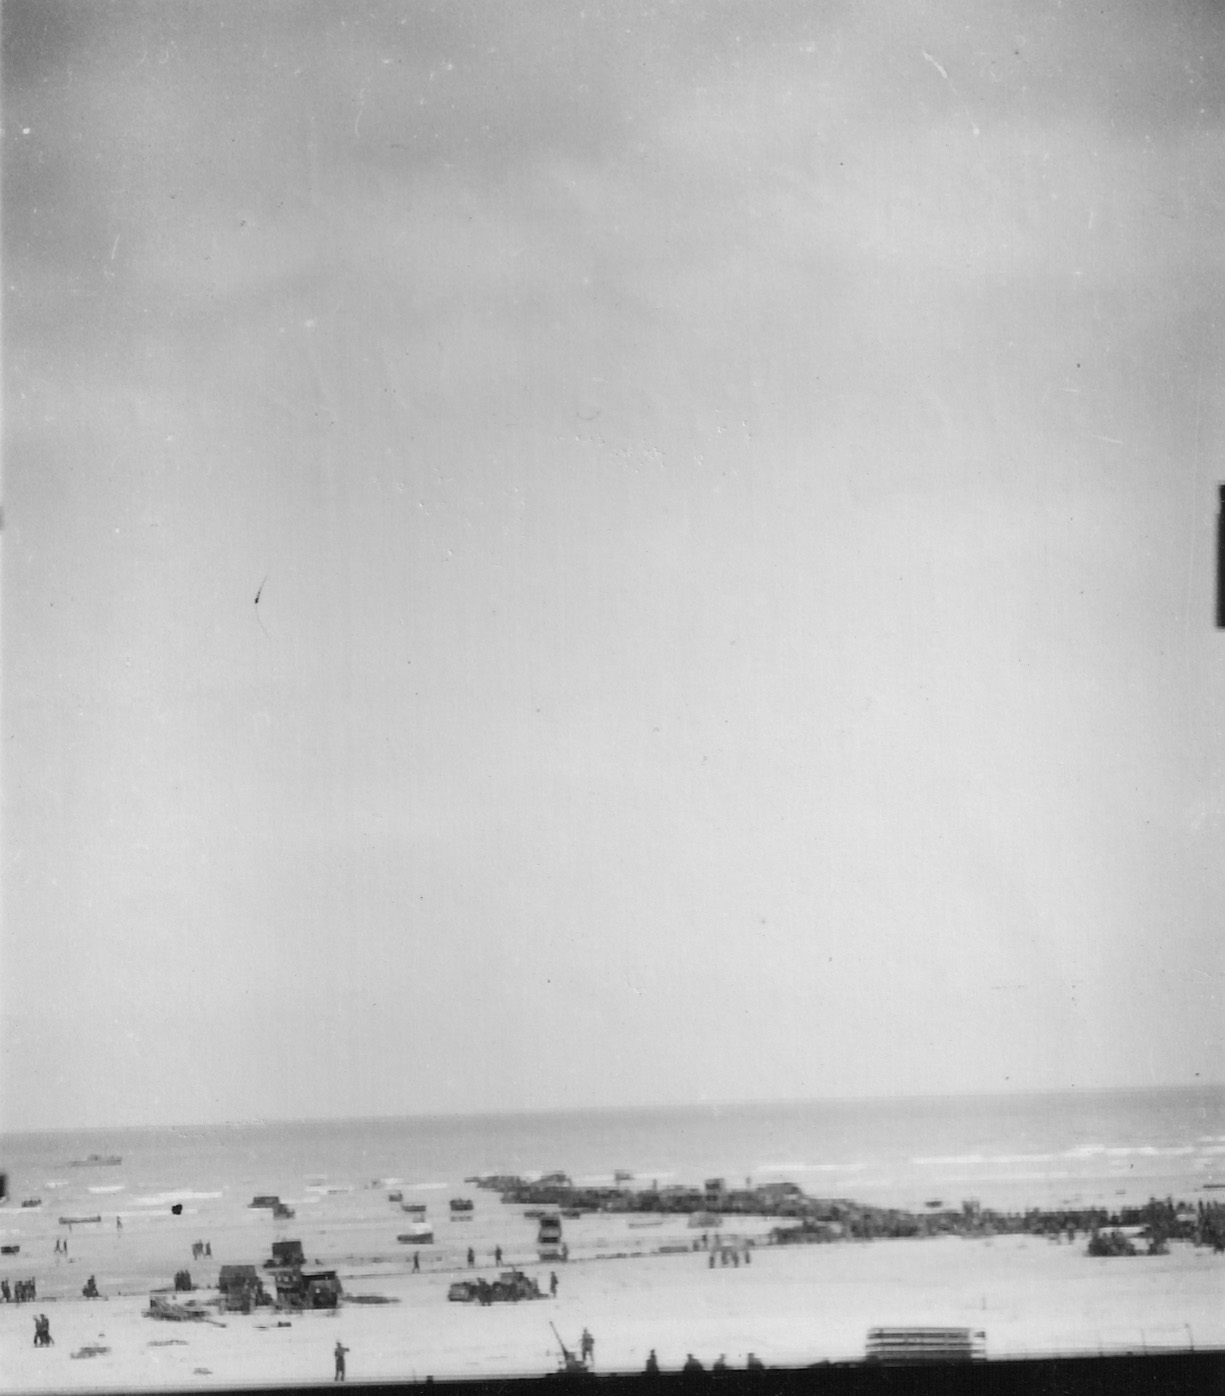 Dunkirk beach in May 1940